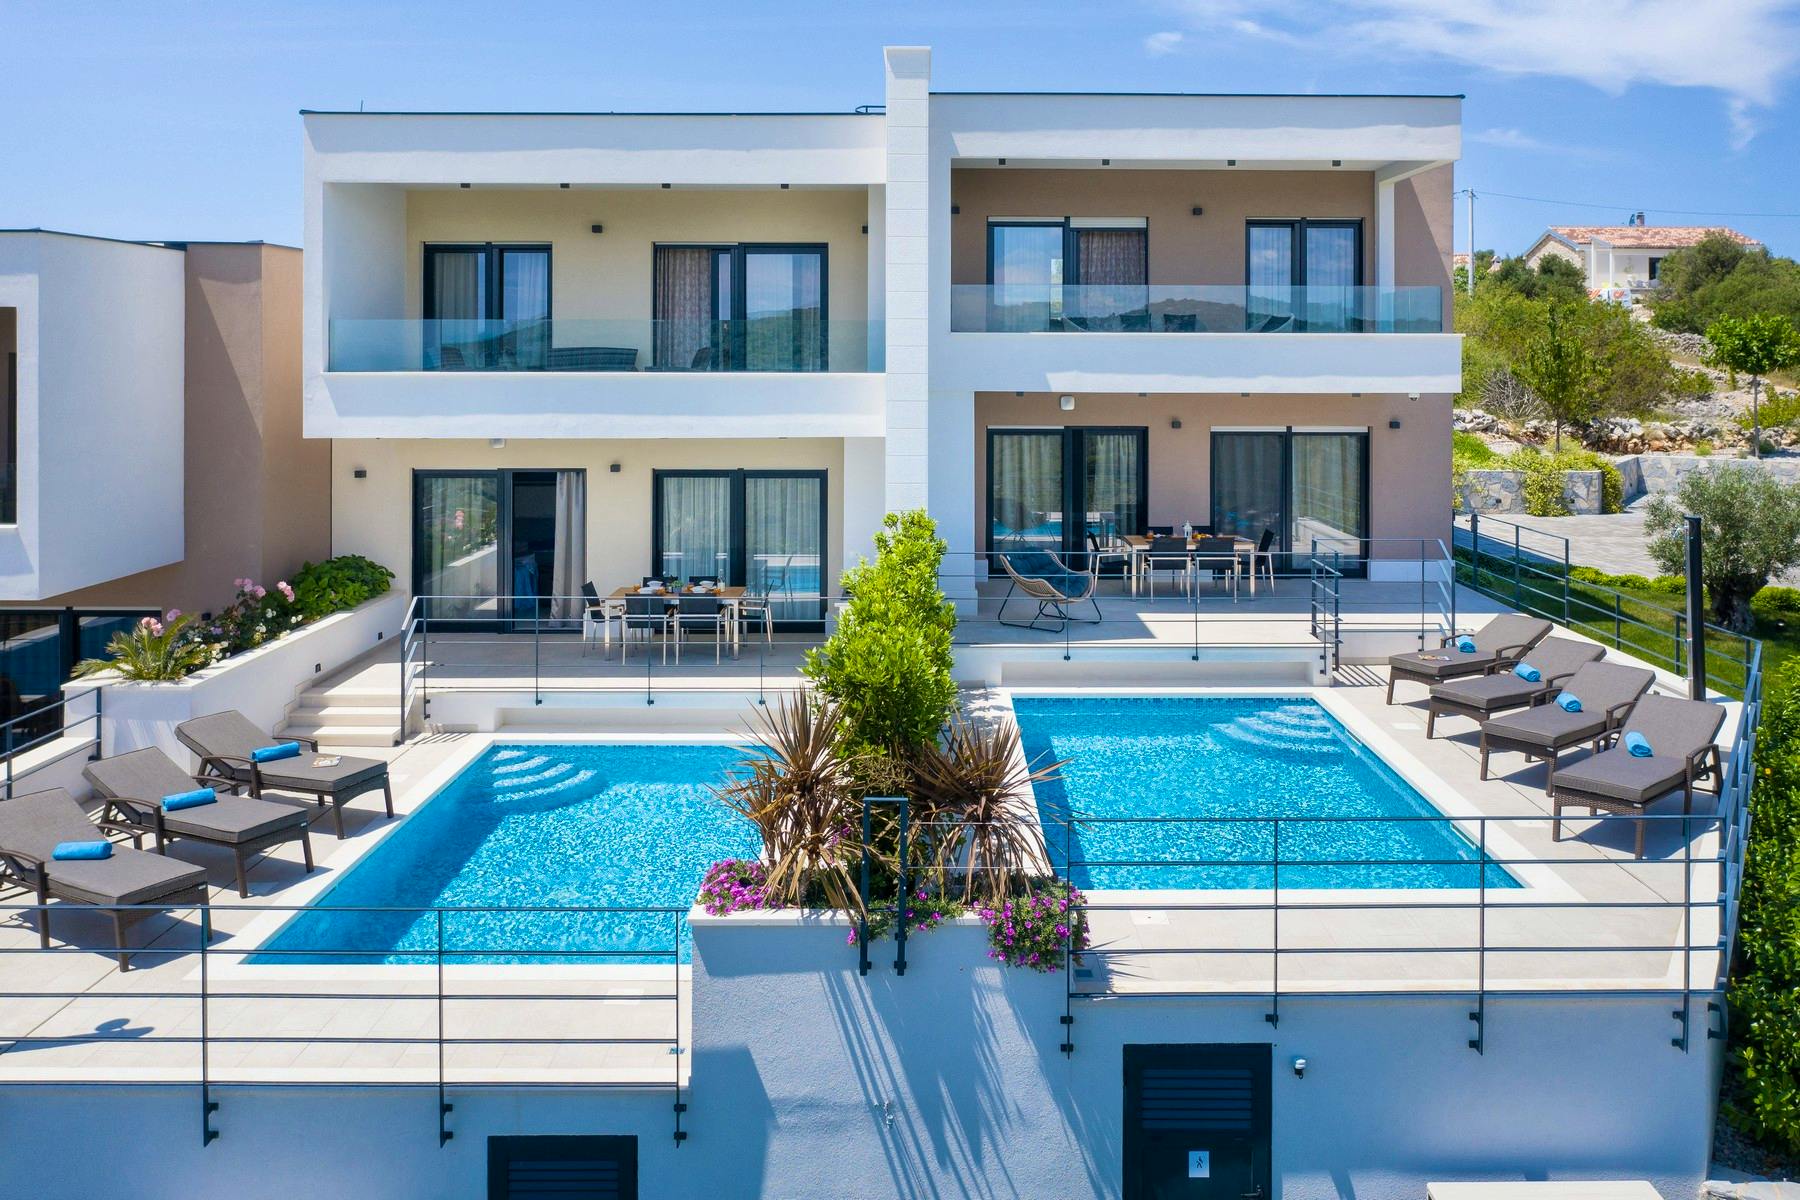 Semi-detached villas with swimming pools